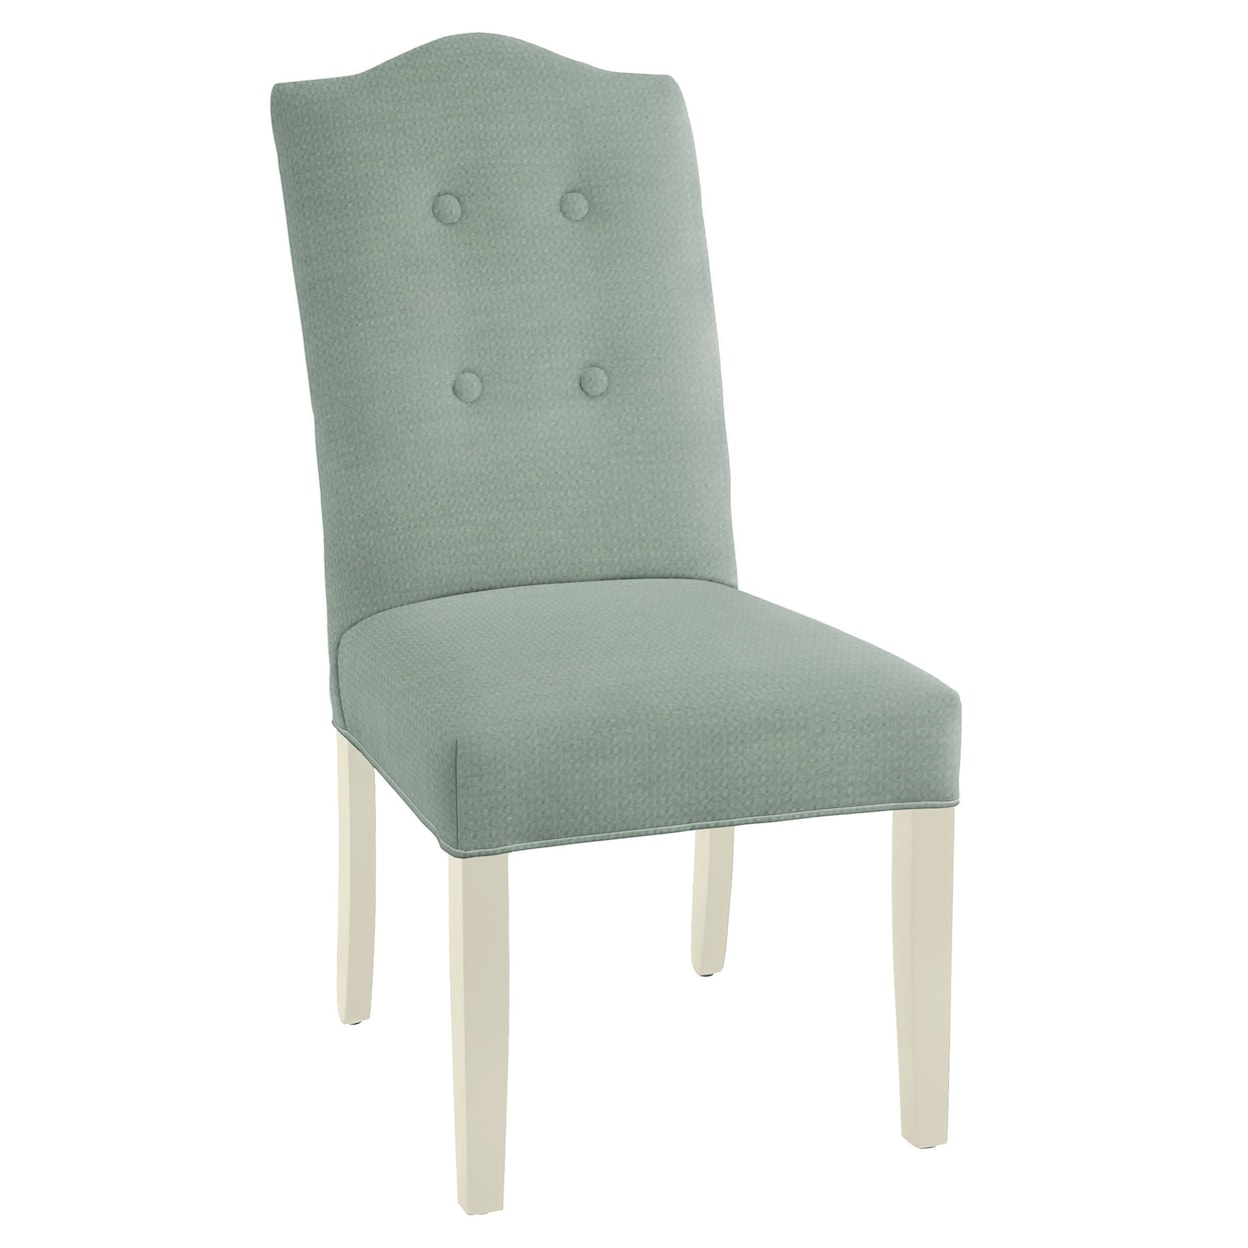 Hekman Upholstery Candice Dining Chair with Buttons